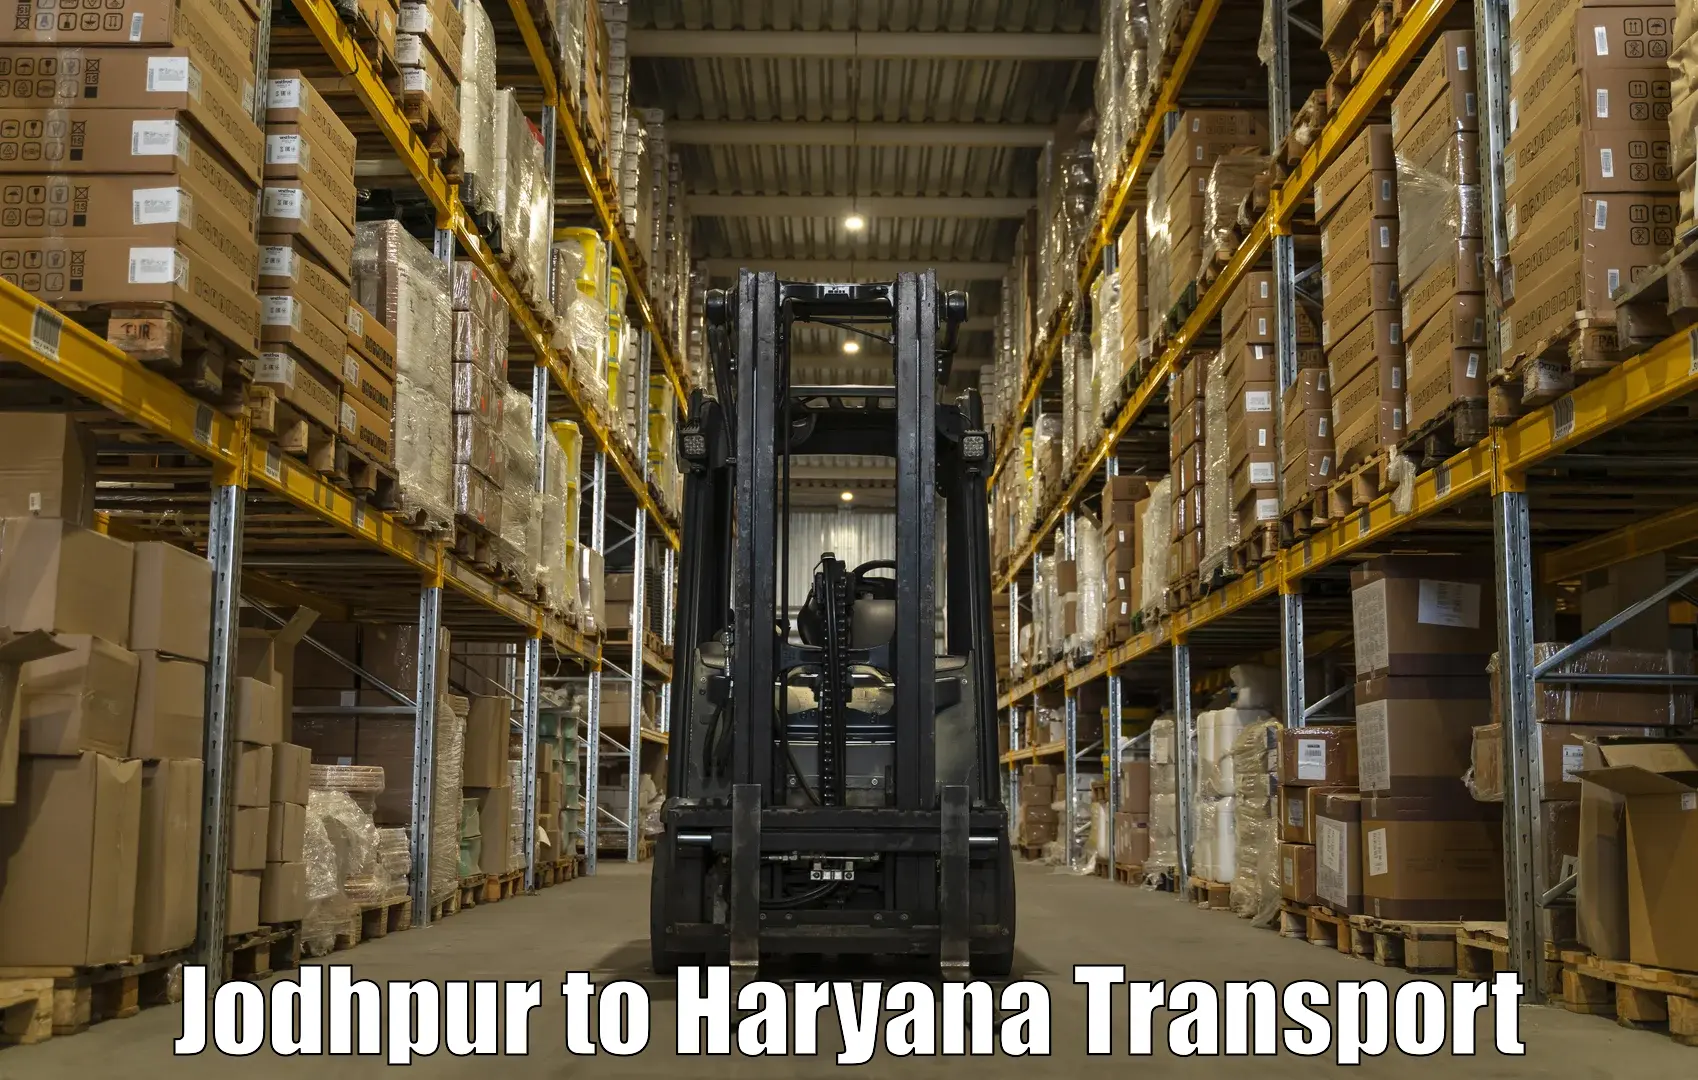 Package delivery services Jodhpur to NCR Haryana